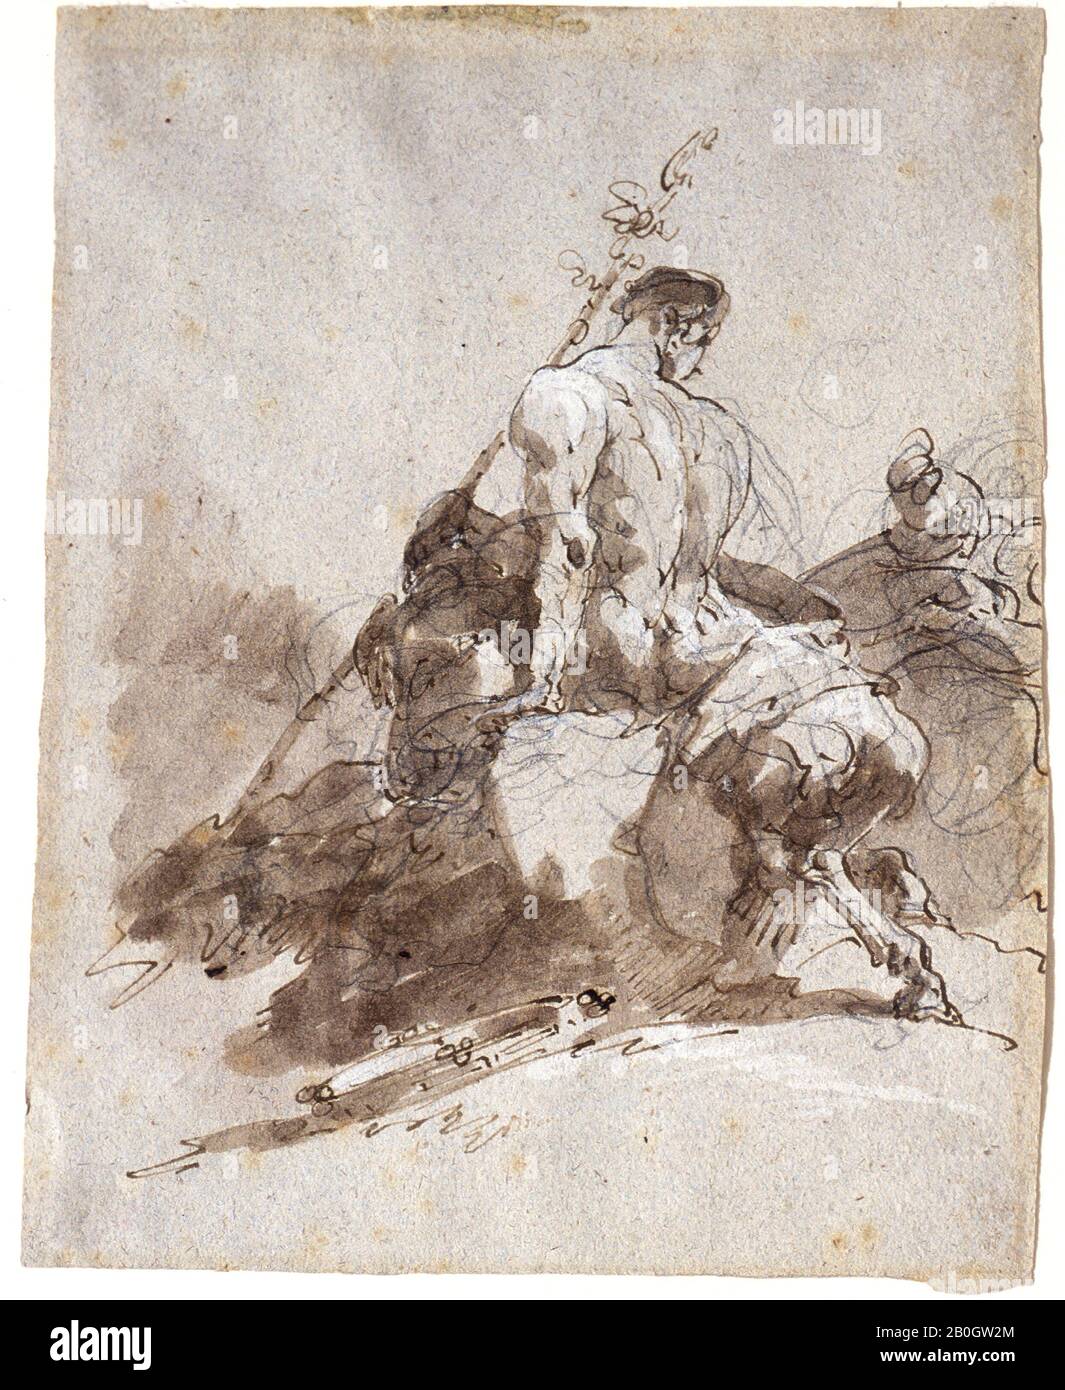 Giuseppe Bernardino Bison, Italian, 1762–1844, Satyr, Seated on a Rock, Seen from Behind, 1790s, Black chalk, pen and ink, and brown wash with white heightenings on brown laid paper, Overall: 9 15/16 x 7 13/16 in. (25.2 x 19.8 cm Stock Photo